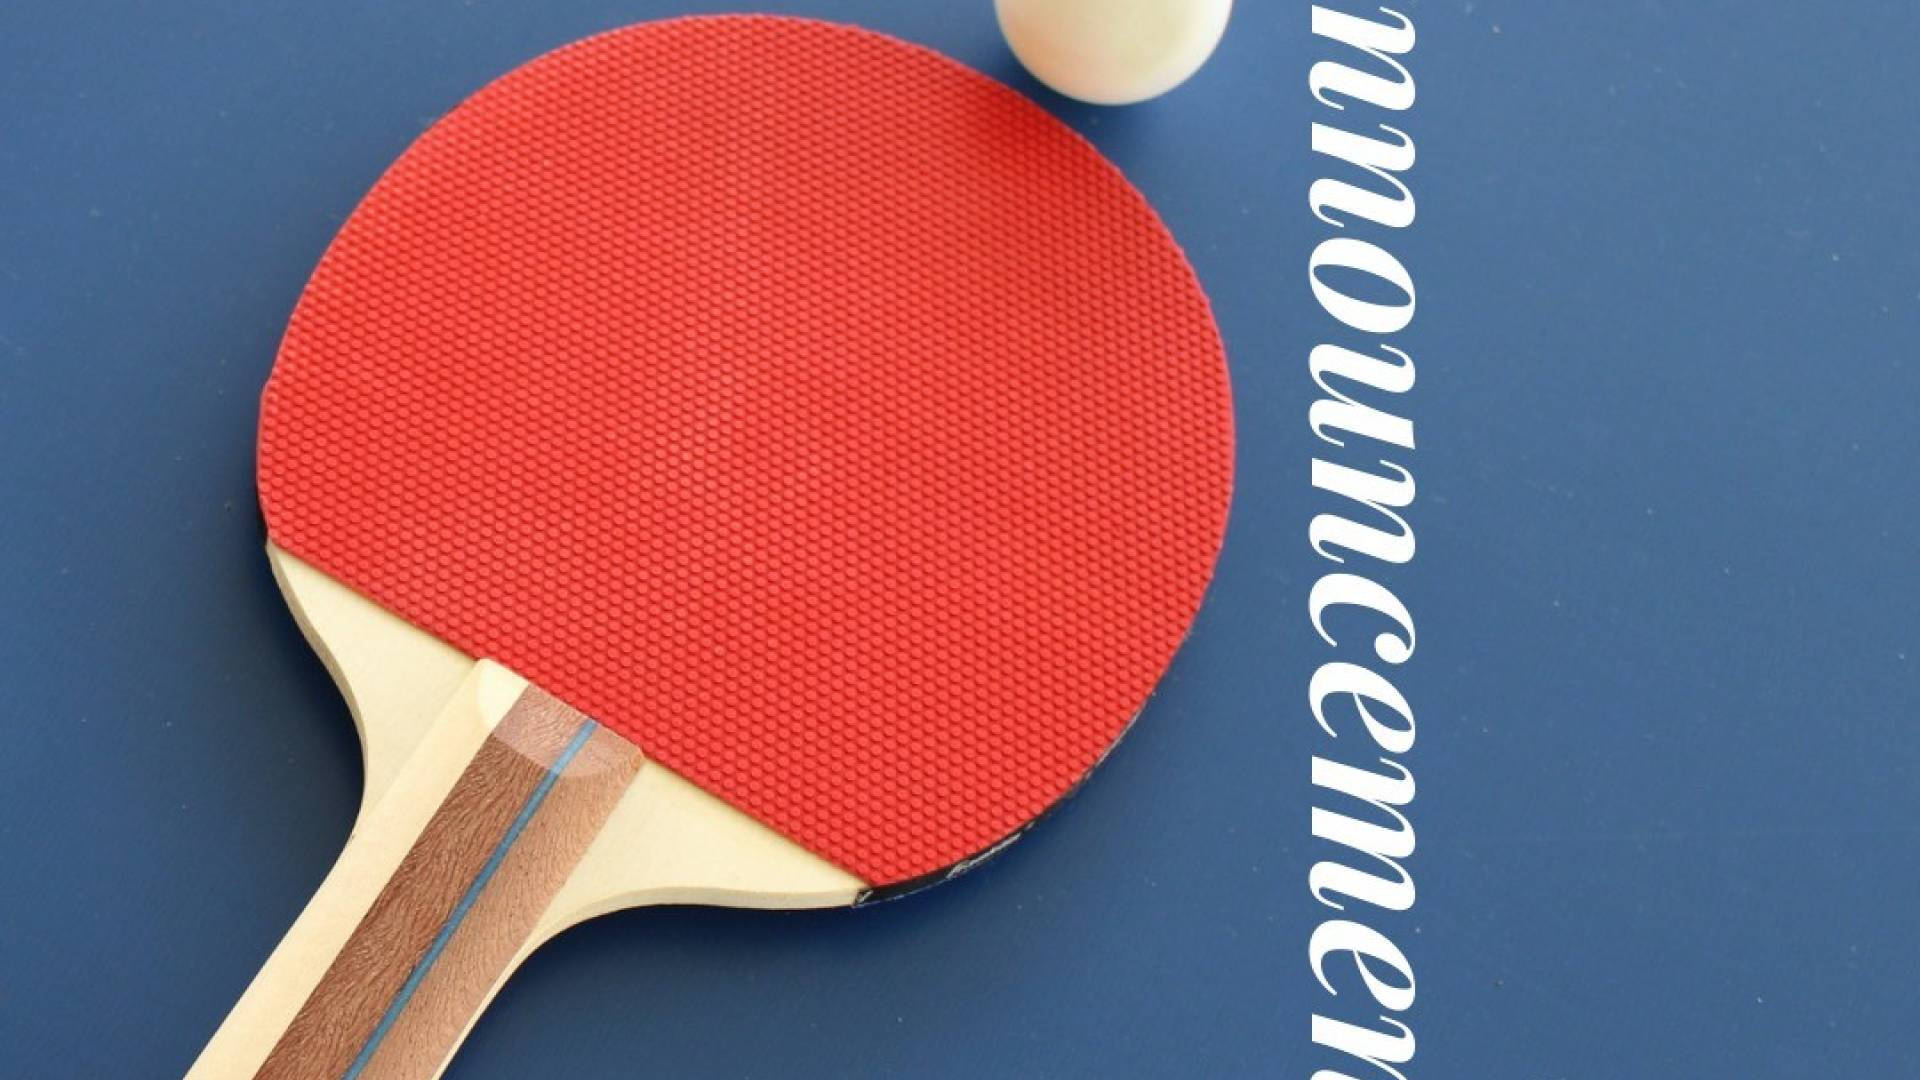 Common Table Tennis Racket Background